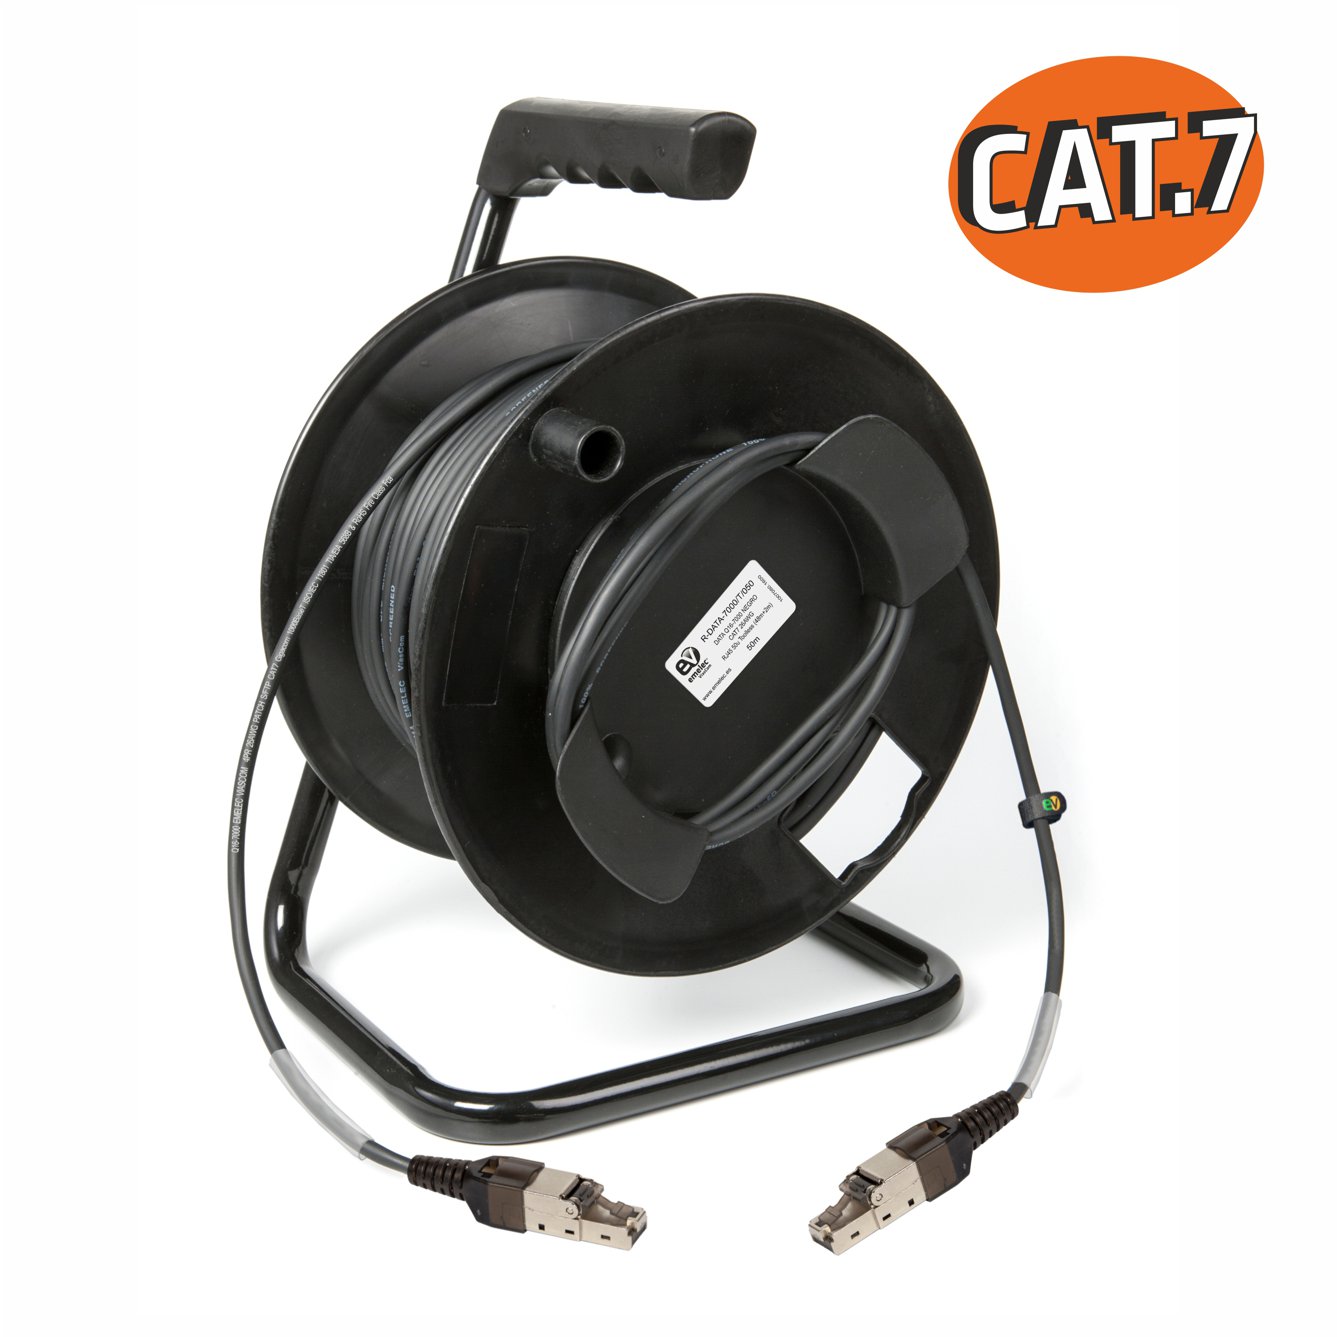 Cable Cat7